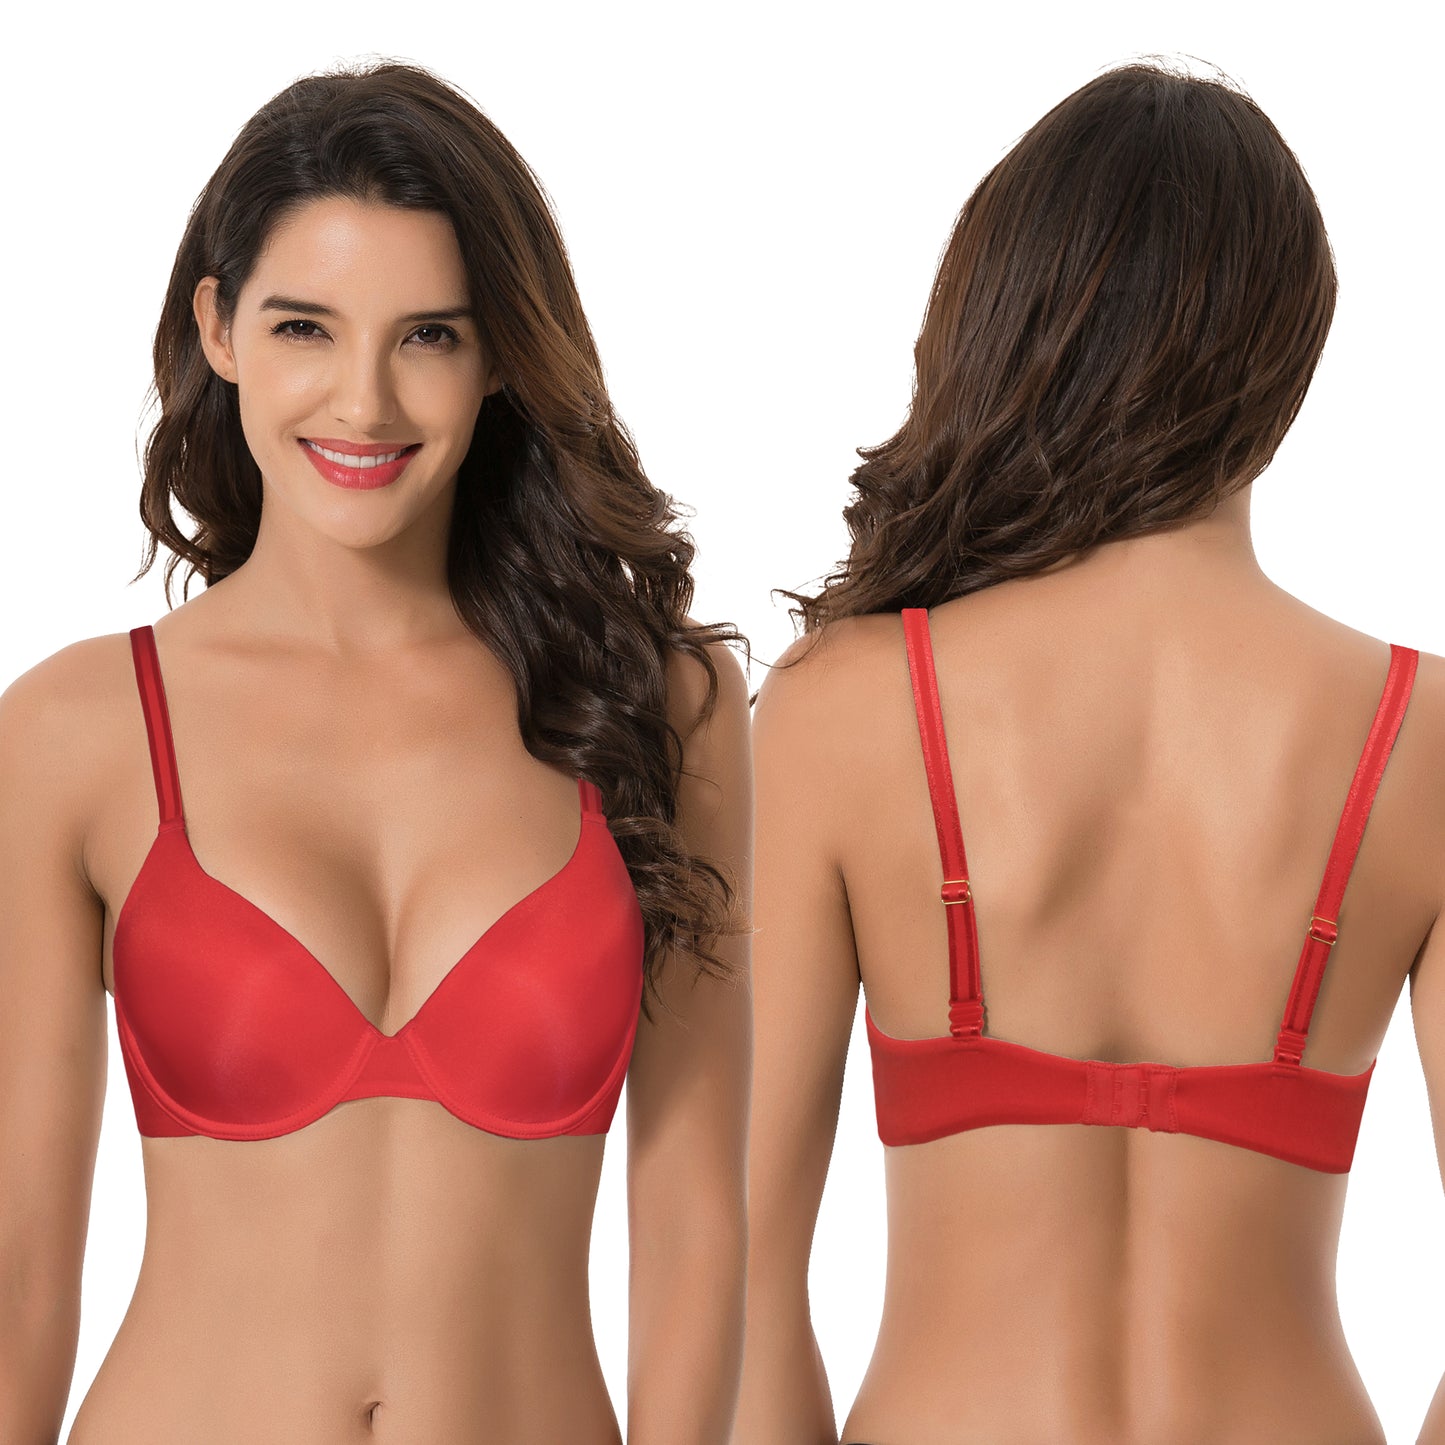 Women's Plus Size Full Coverage Padded Underwire Bra-2PK-NUDE,RED